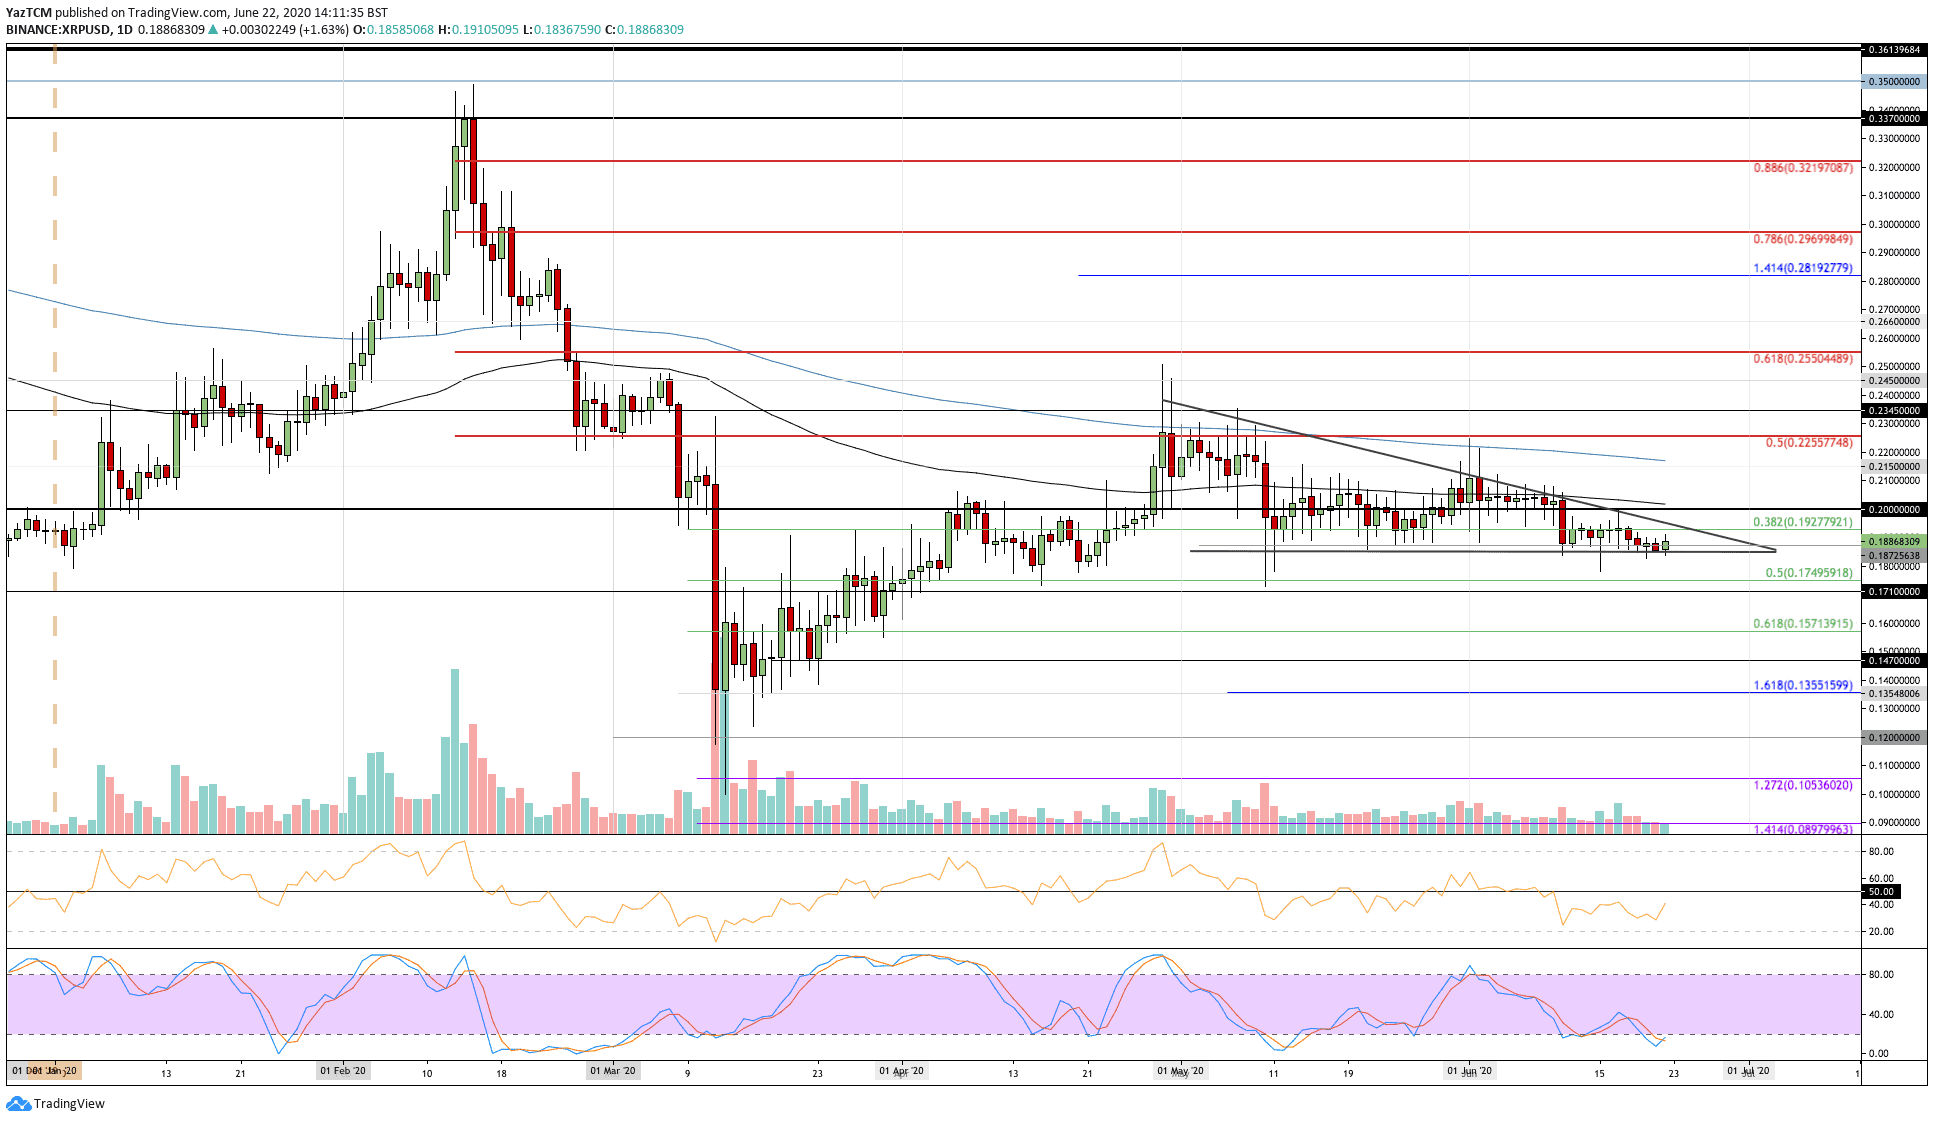 Ripple Price Analysis: XRP Drops Below 2000 SAT For the First Time Since December 2017